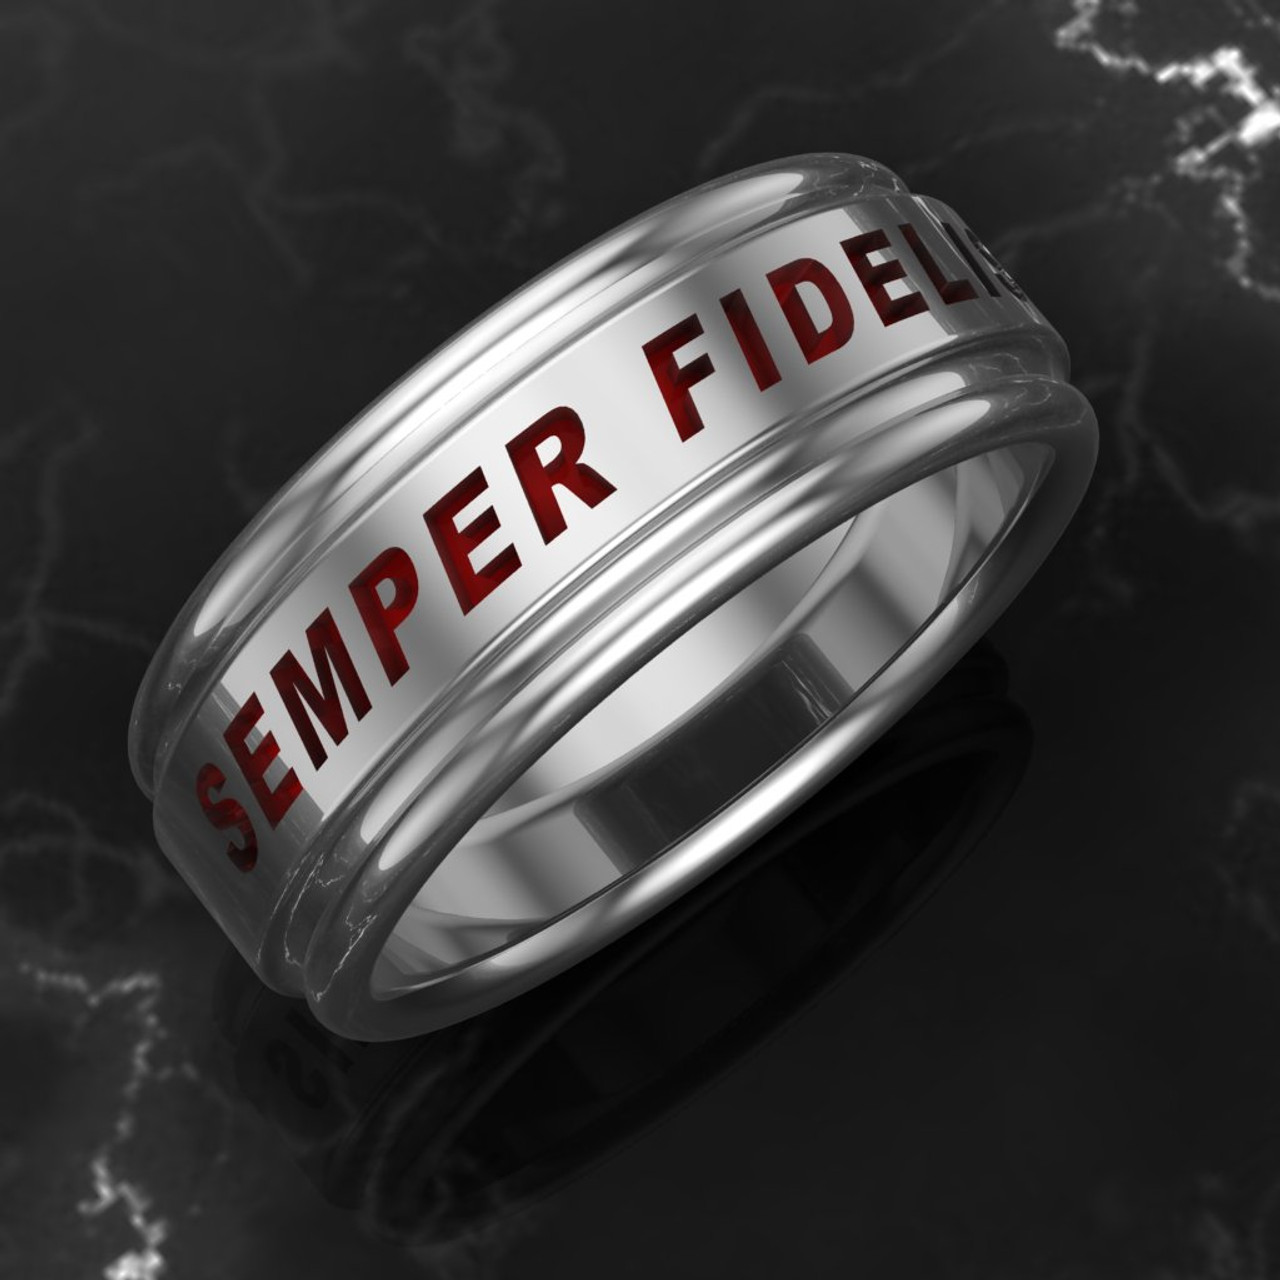 USMC Marines Semper Fidelis Band
The stunning Semper Fidelis 

The band is comfort fit and 7.5 mm wide.
Your choice of black or red background.
 
"Made by Marines for Marines"

 
Available in Sterling Silver, 10k, 14k and 18k
White or Yellow gold.

 100% Satisfaction Guaranteed